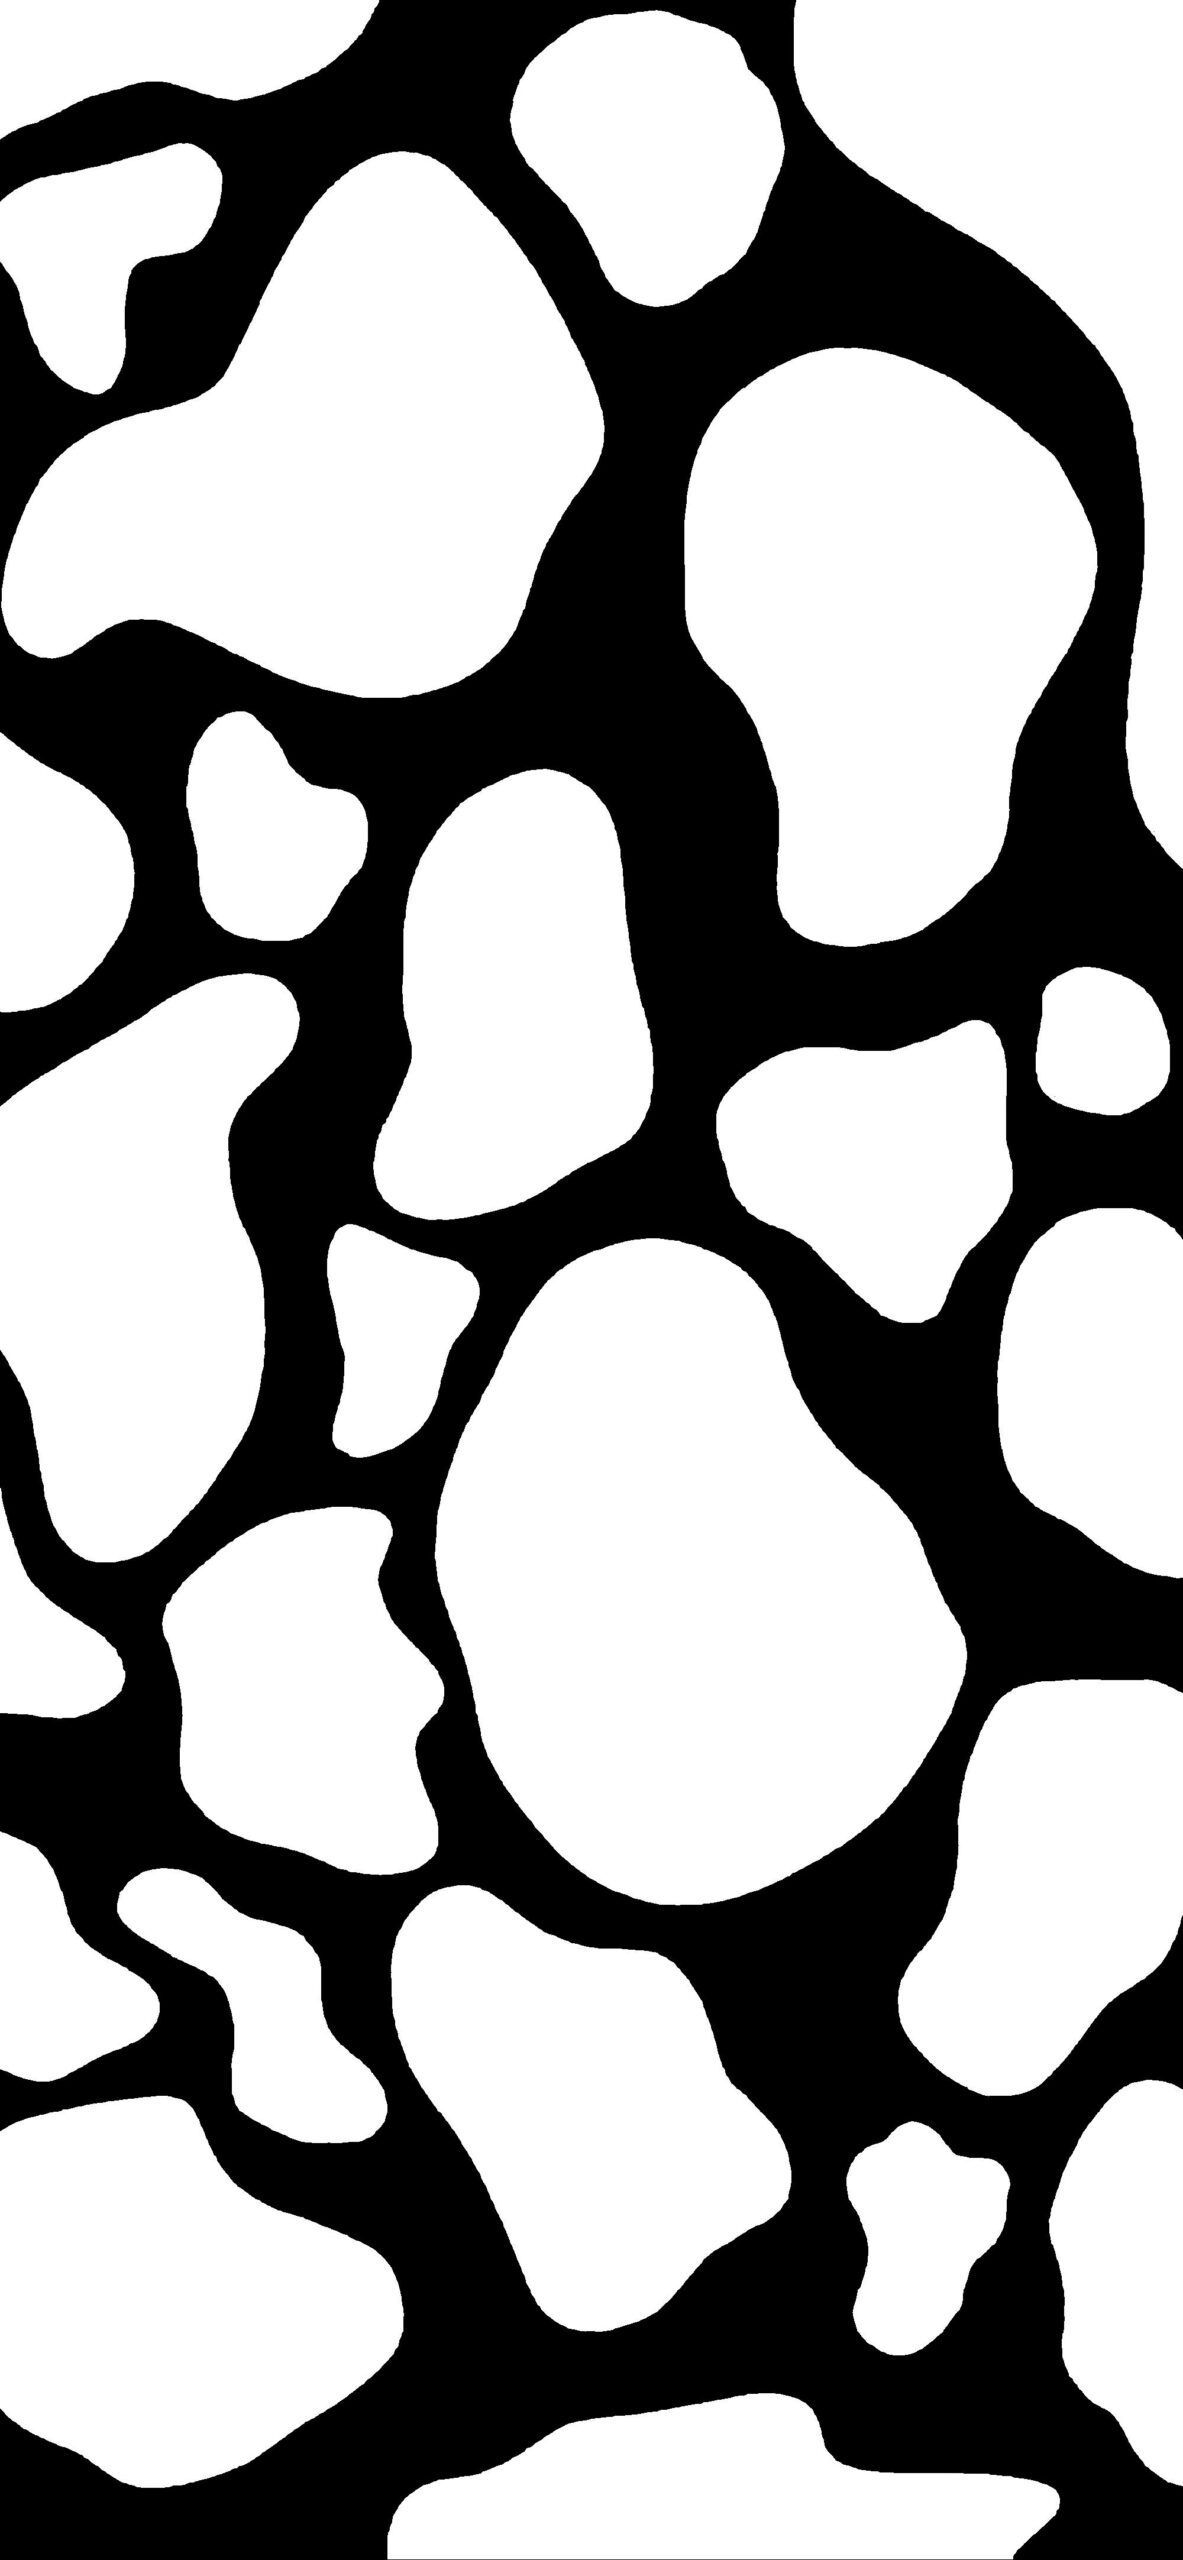 Cow Pattern Wallpaper Black And White Wallpaper for Phone